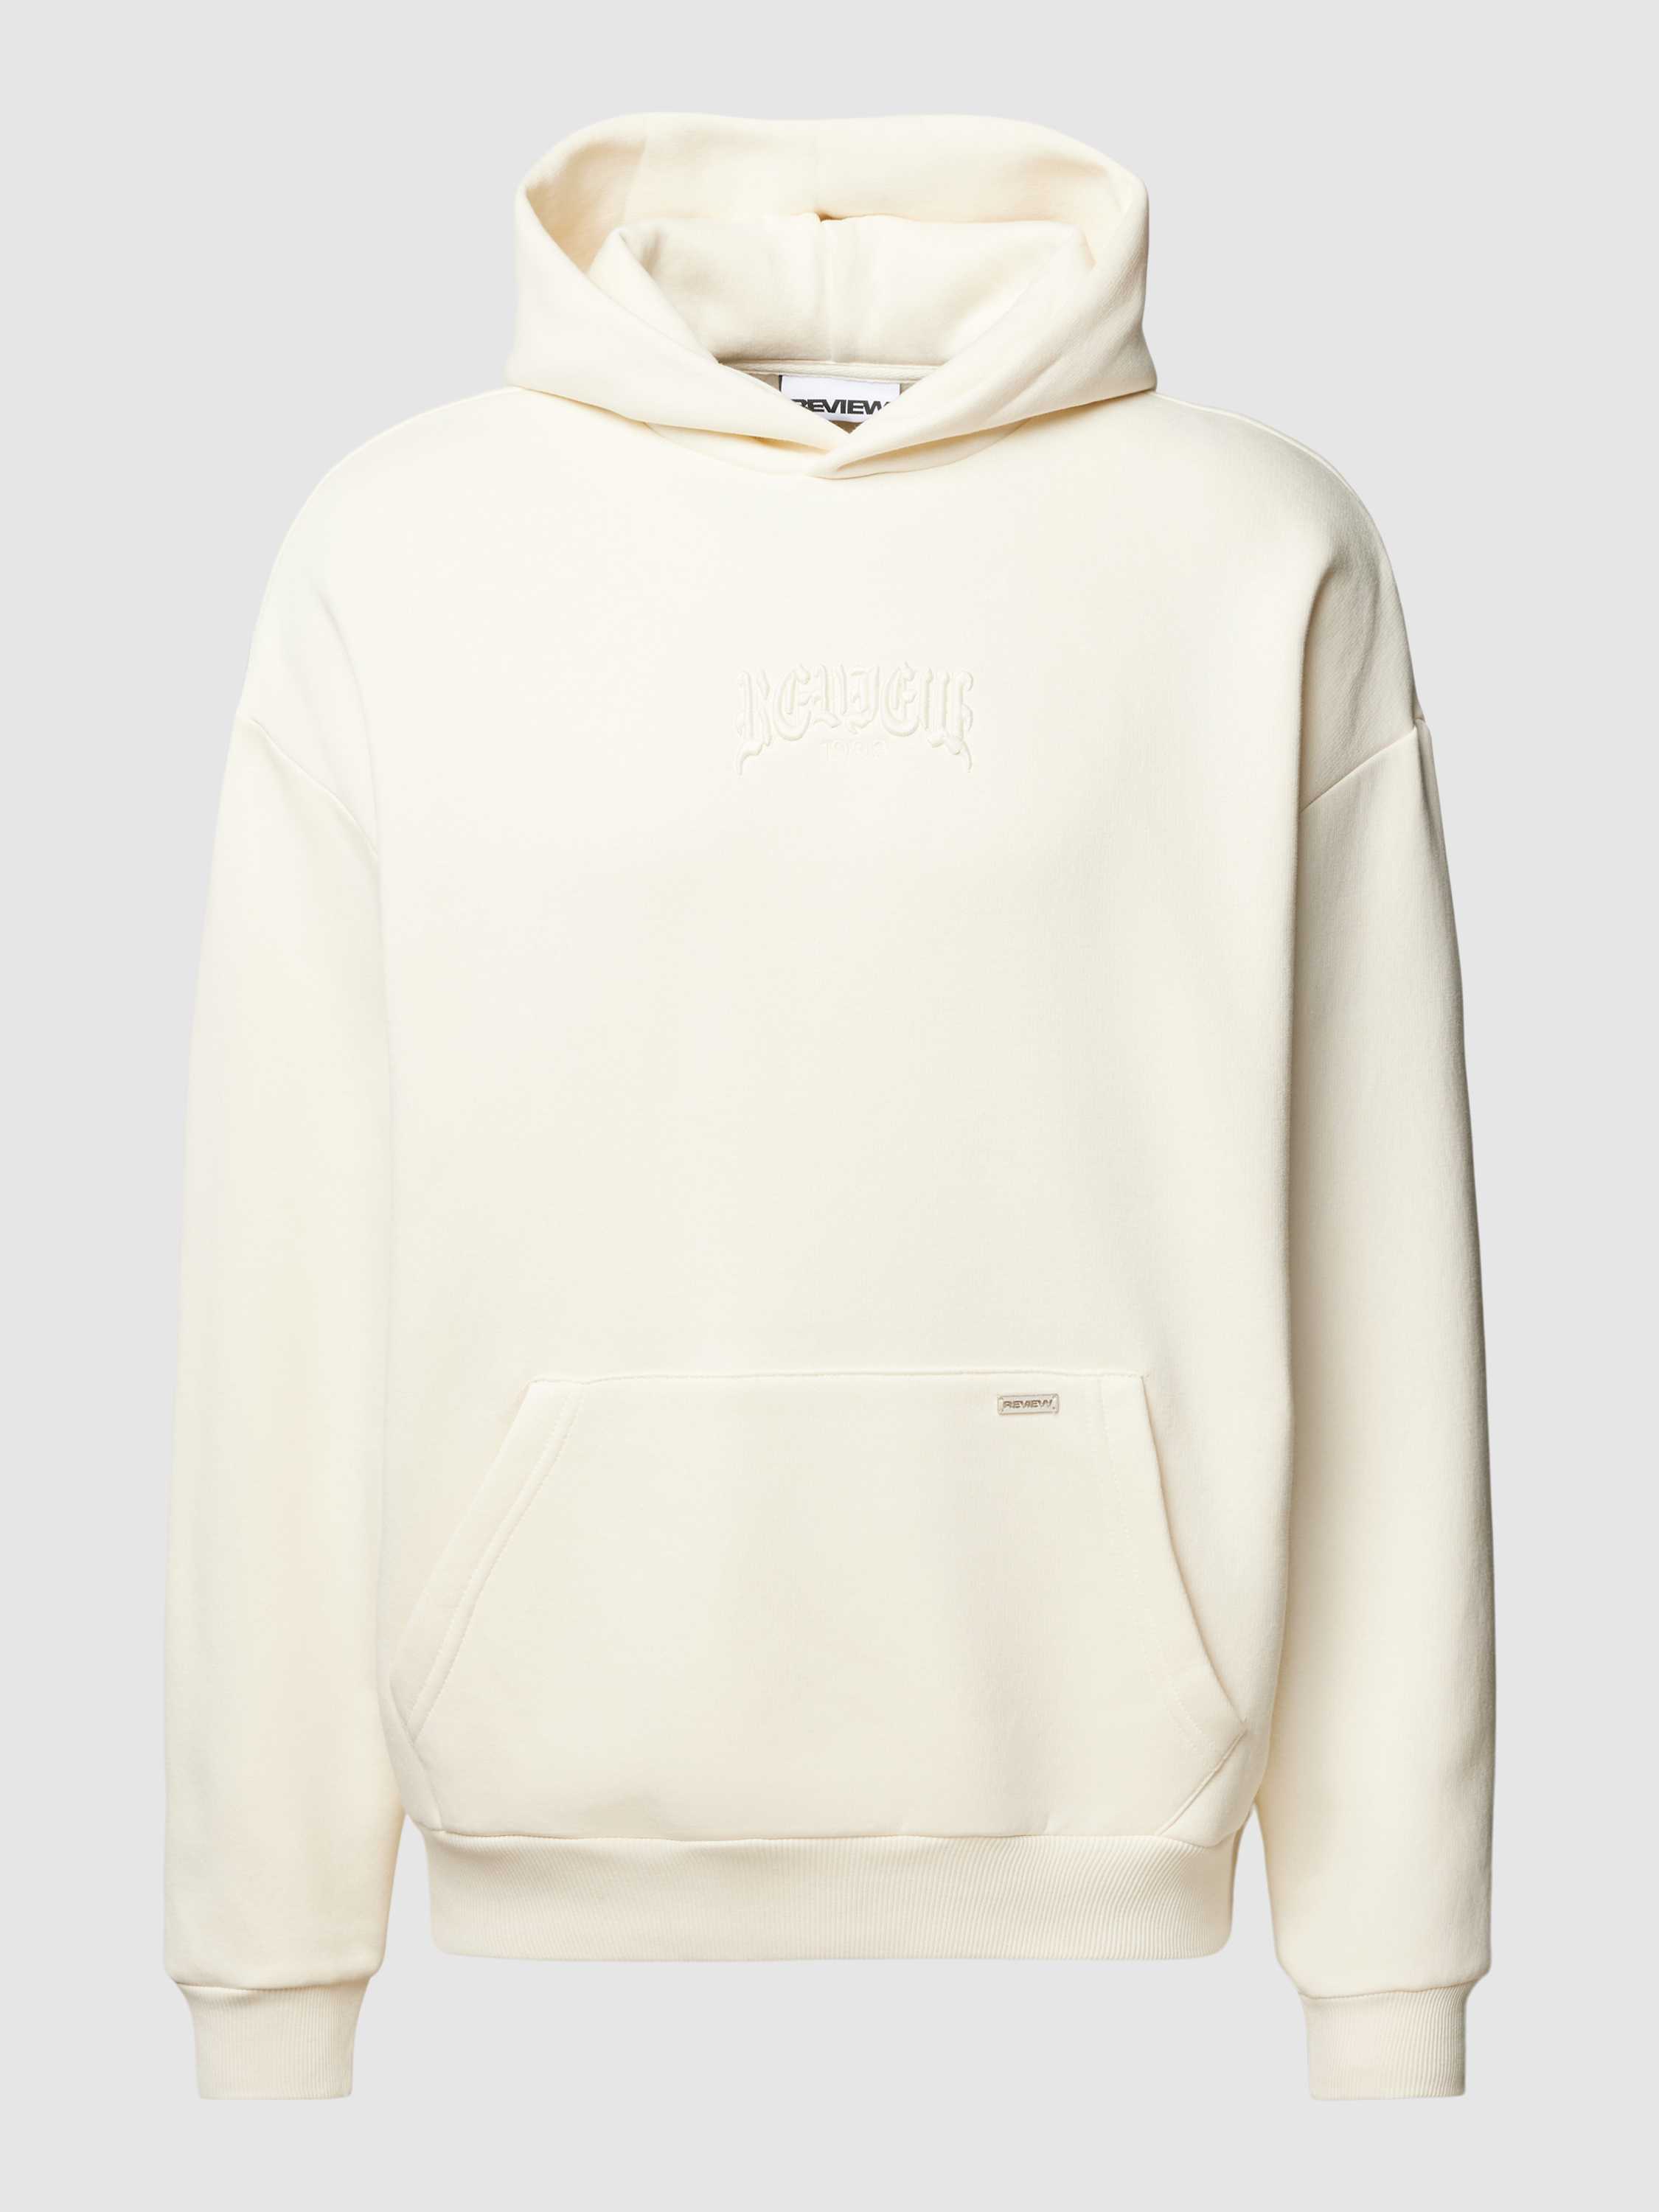 REVIEW Basic hoodie